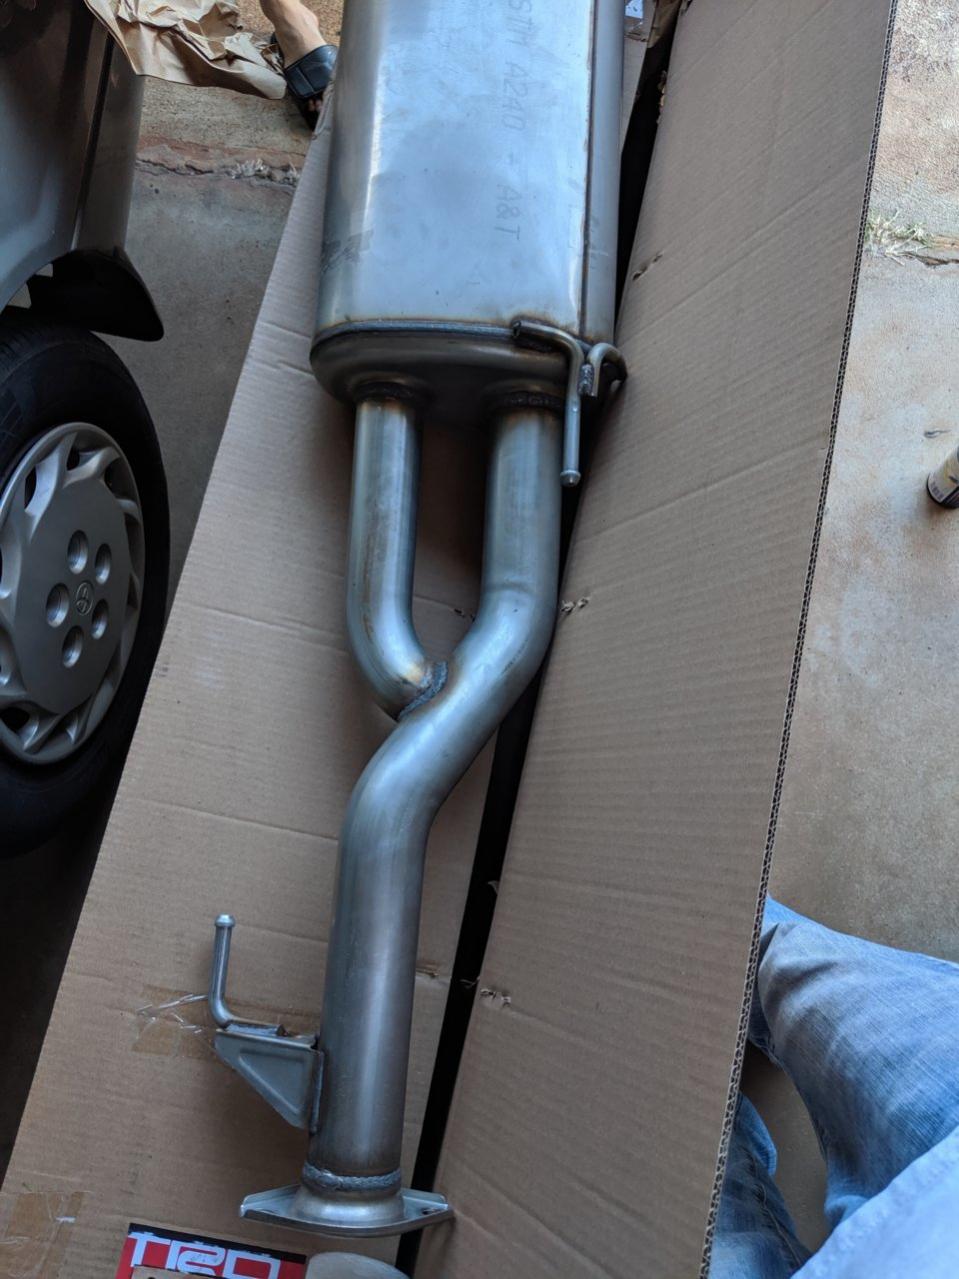 TRD Exhaust - Available in 2020 M.Y.-img_20190829_173144-jpg